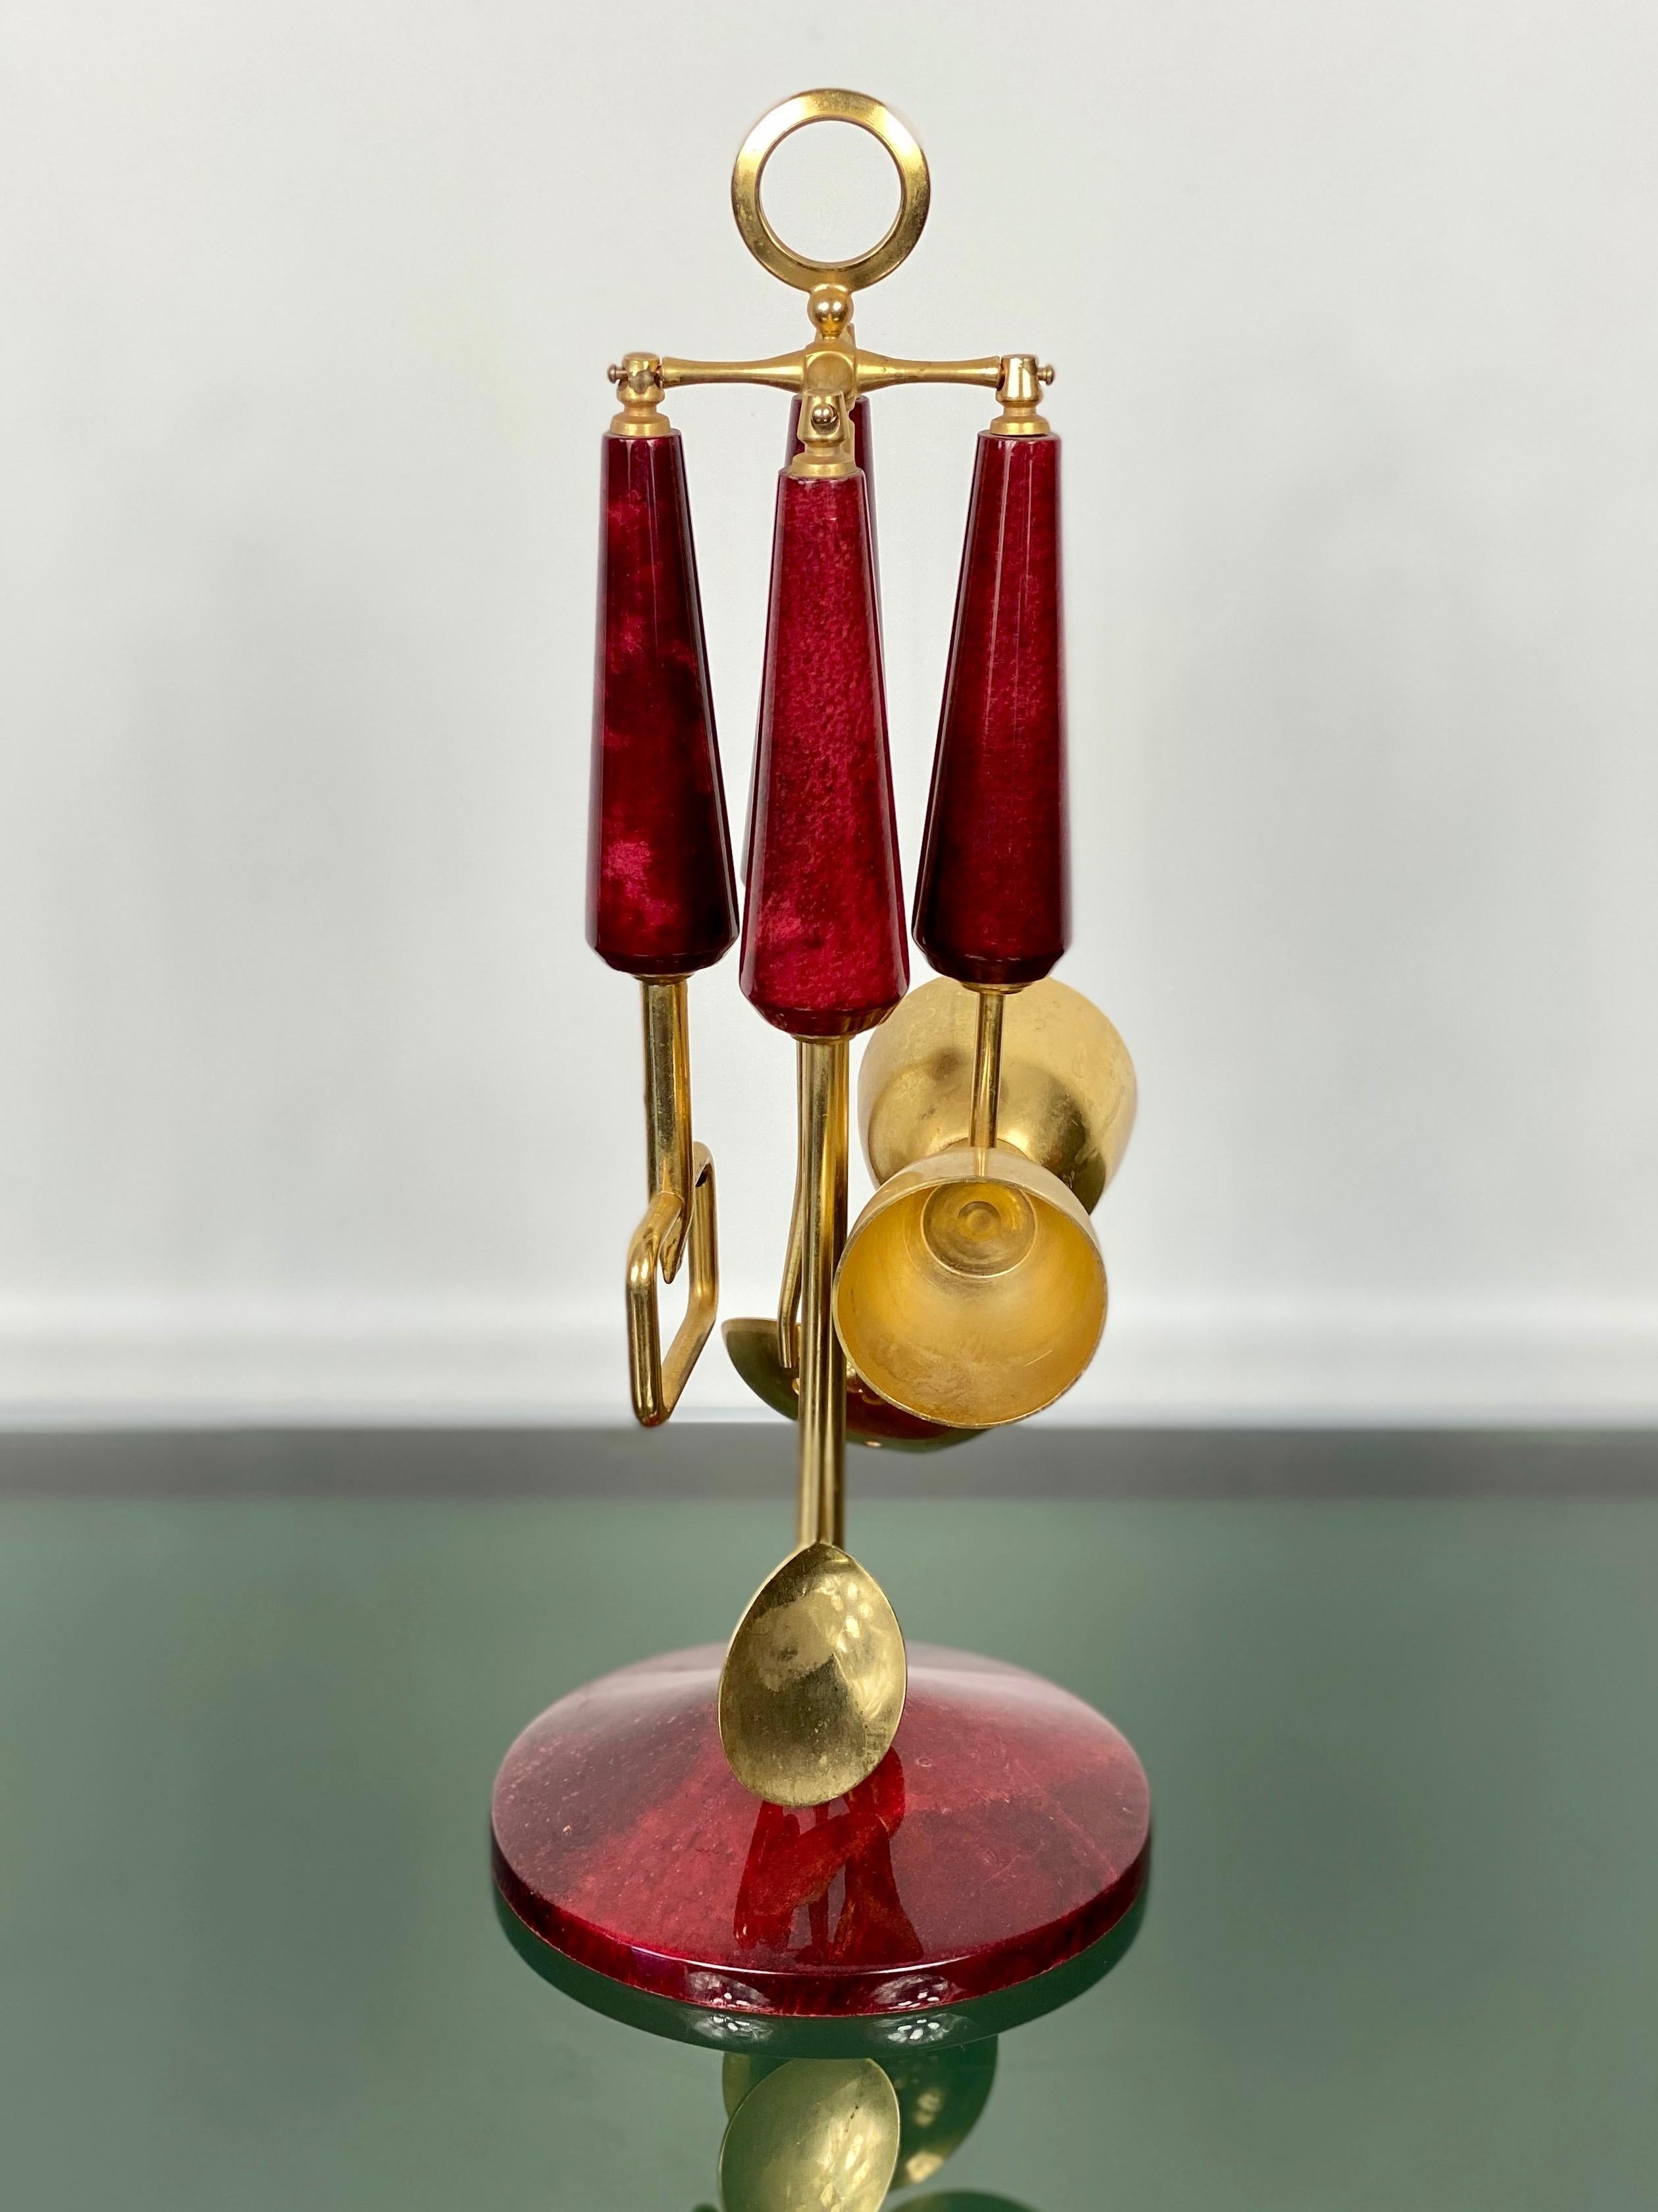 Wonderful bar set of Aldo Tura in lacquered goatskin. Signed with its original label on the bottom.

This set was executed, circa 1960 in a red parchment. Along with artists like Piero Fornasetti and Carlo Bugatti, Aldo Tura (1909-1963) definitely